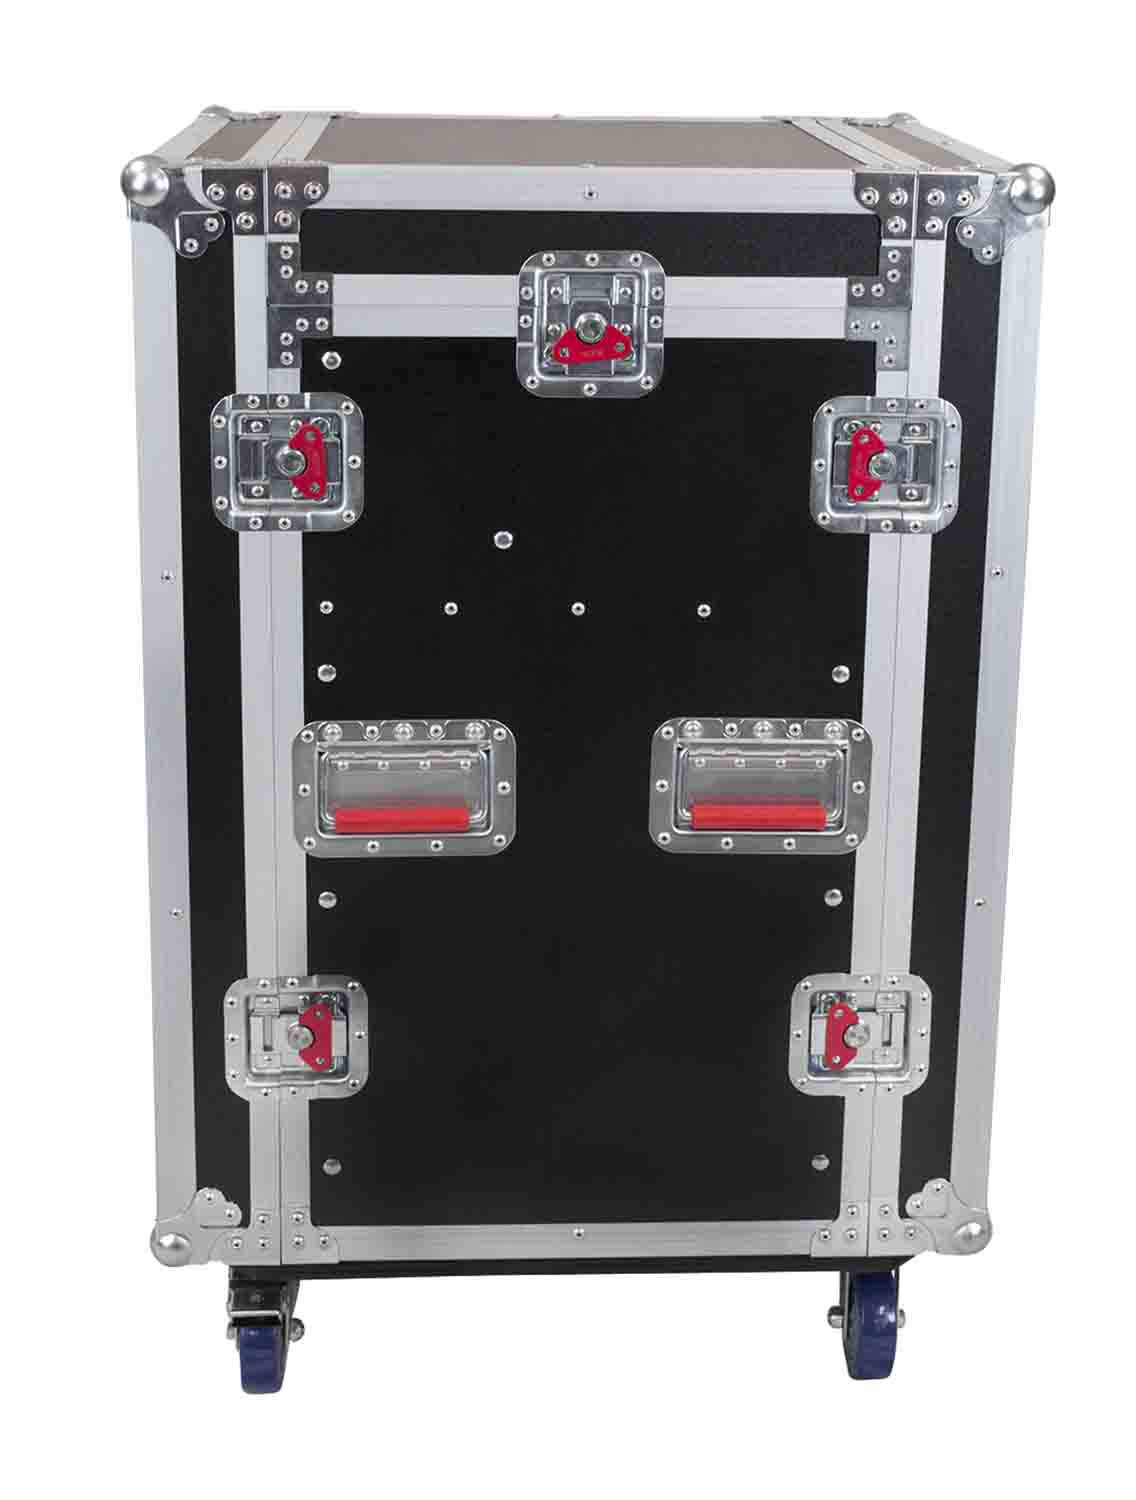 Gator Cases G-TOUR 10X12 PU, 10U Top 12U Side Console Rack Case with Casters - Hollywood DJ